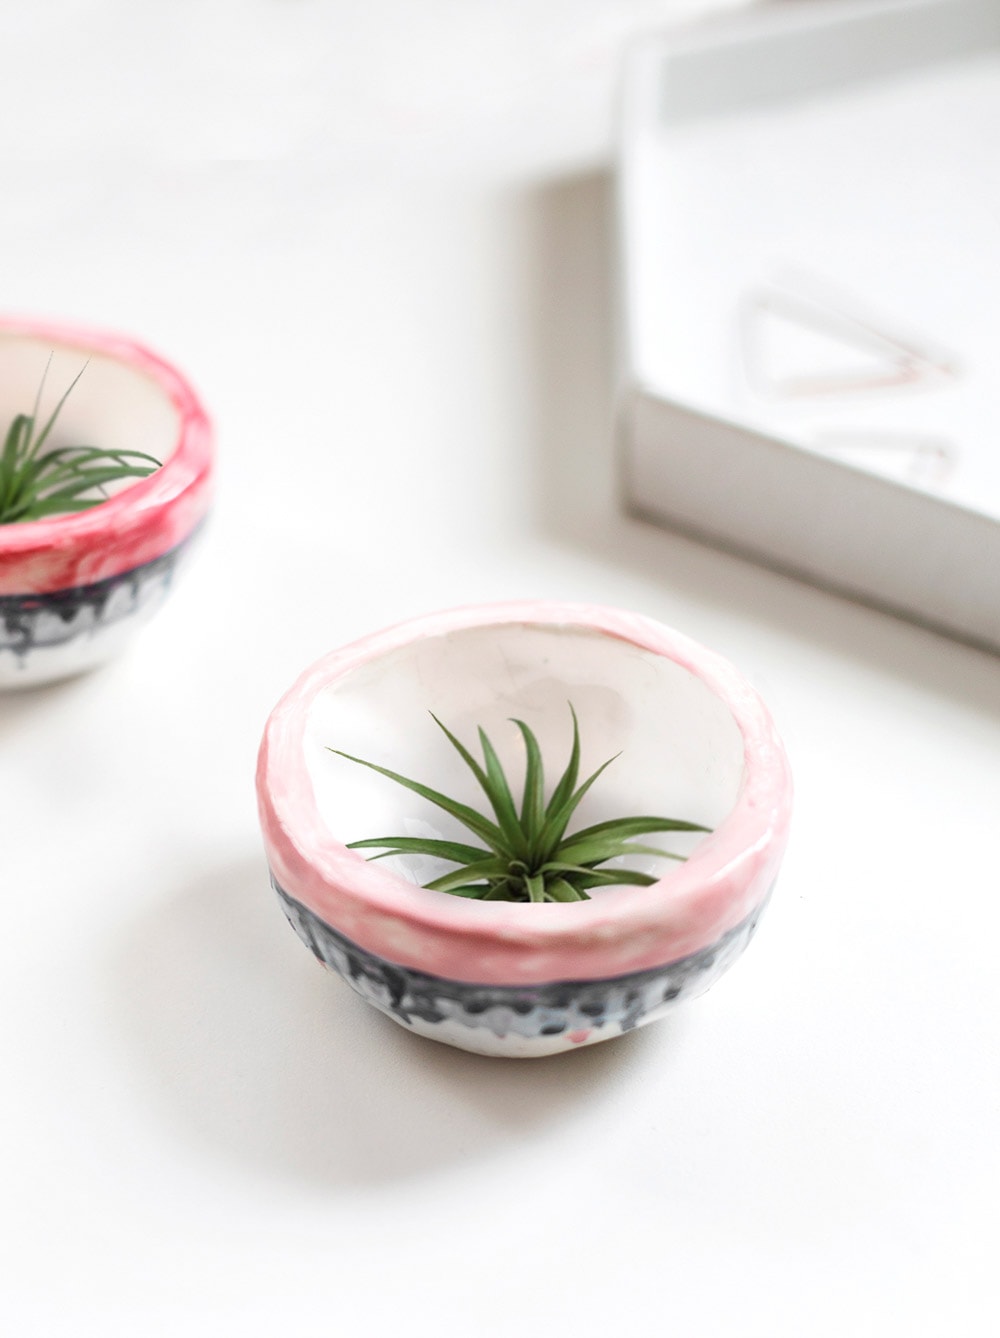 DIY Gifts for Mom: Homemade Mini Planters